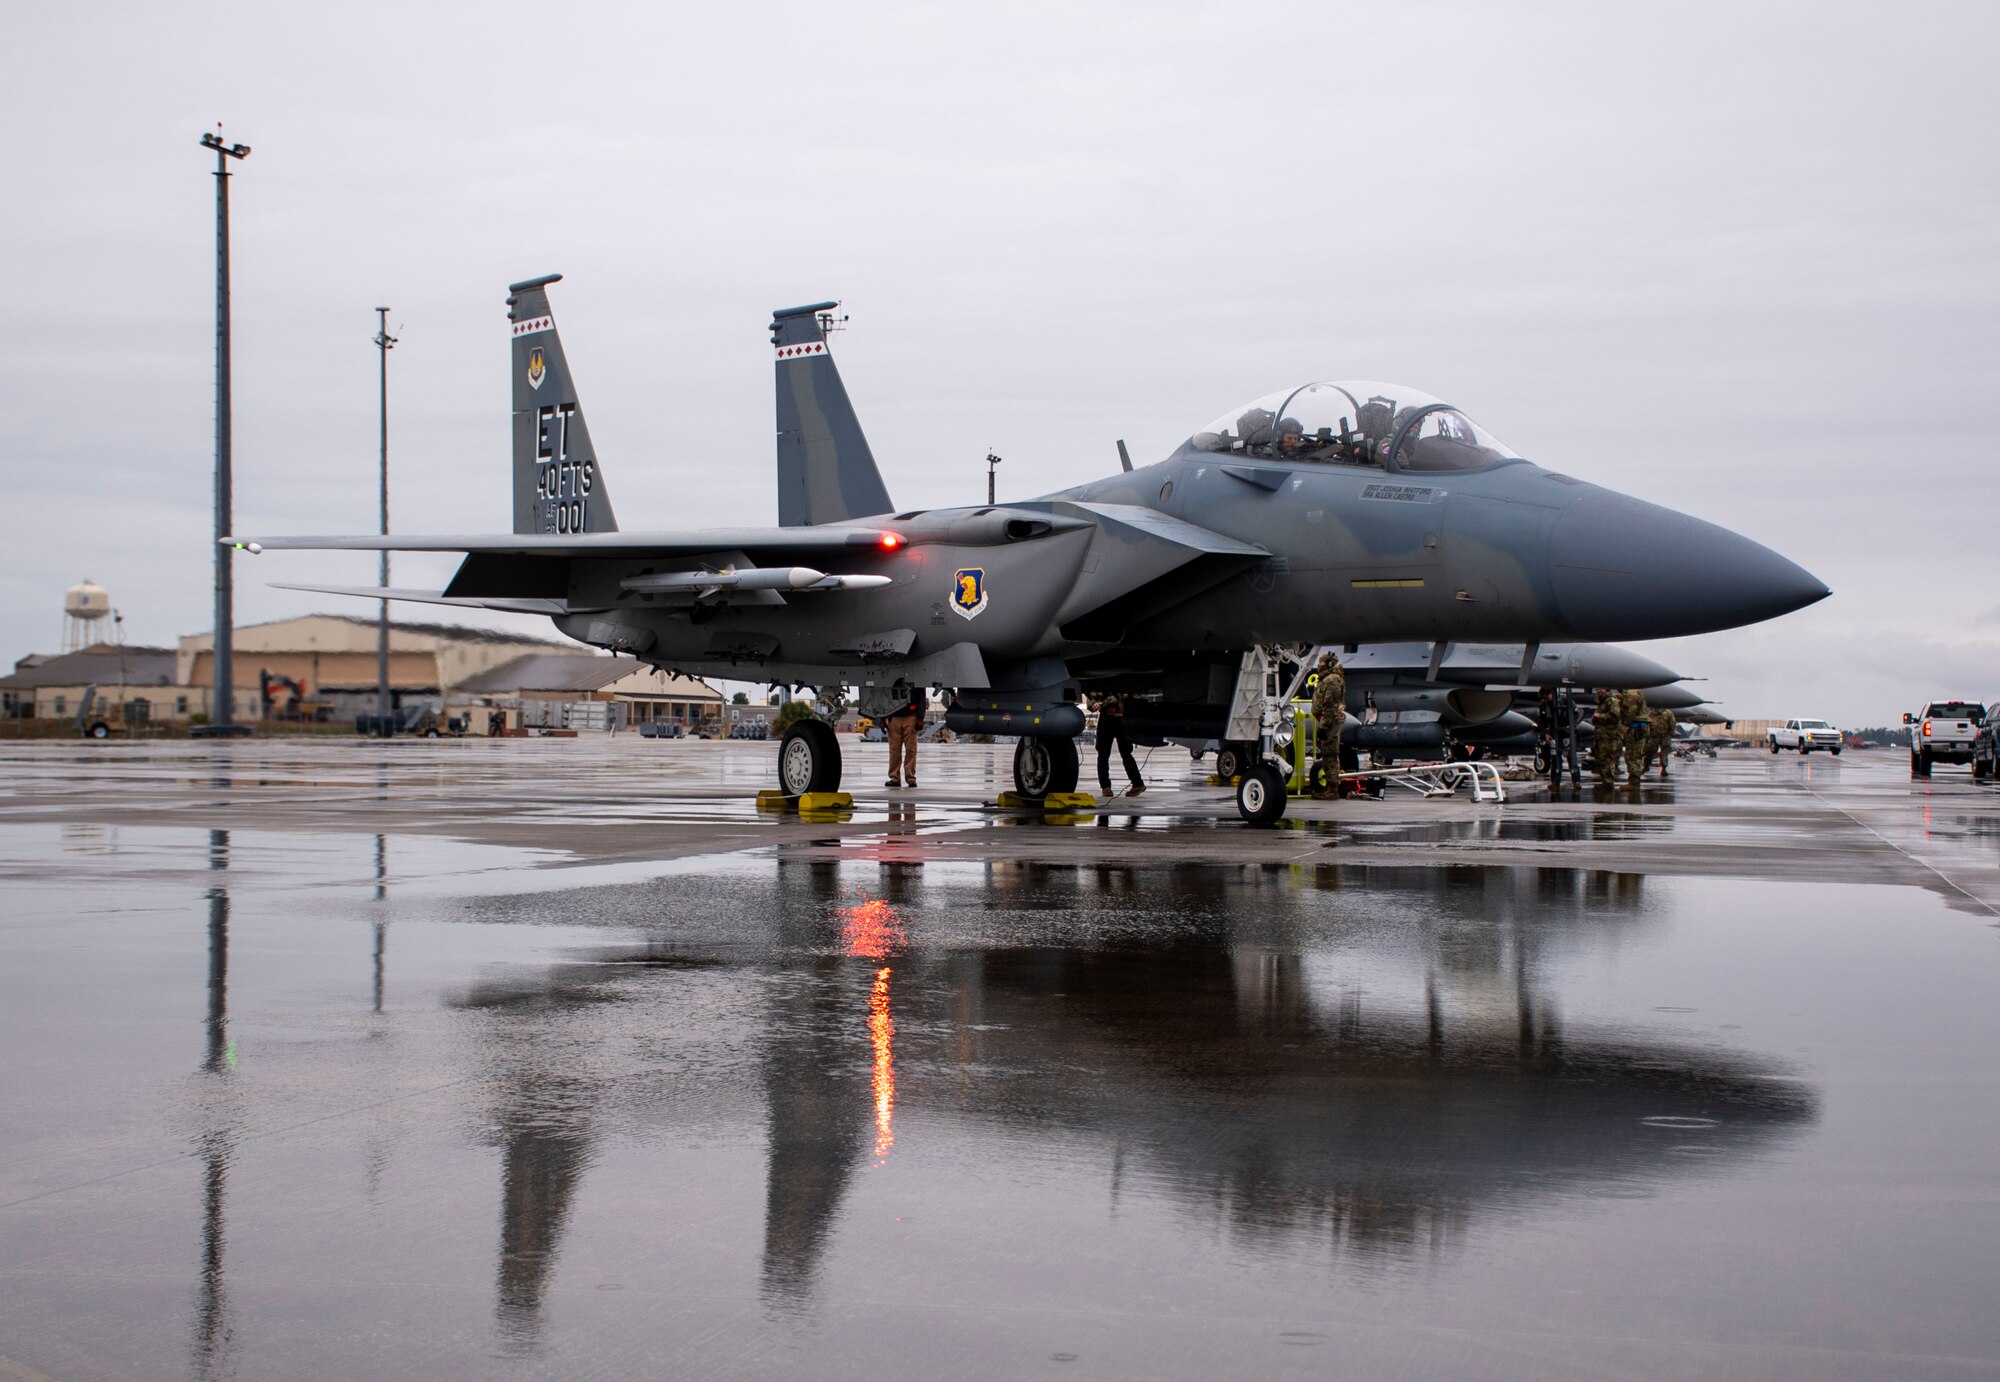 The 40th Flight Test Squadron’s F-15EX Eagle II prepares to taxi during the 53rd Weapons Evaluation Group’s Weapons System Evaluation Program East hosted by Tyndall Air Force Base, Florida, Jan. 25, 2022. The aircrew aboard fired an AIM-120 missile during the sortie marking the first live firing from the Air Force’s newest fighter aircraft. (U.S. Air Force photo/1st Lt. Lindsey Heflin)